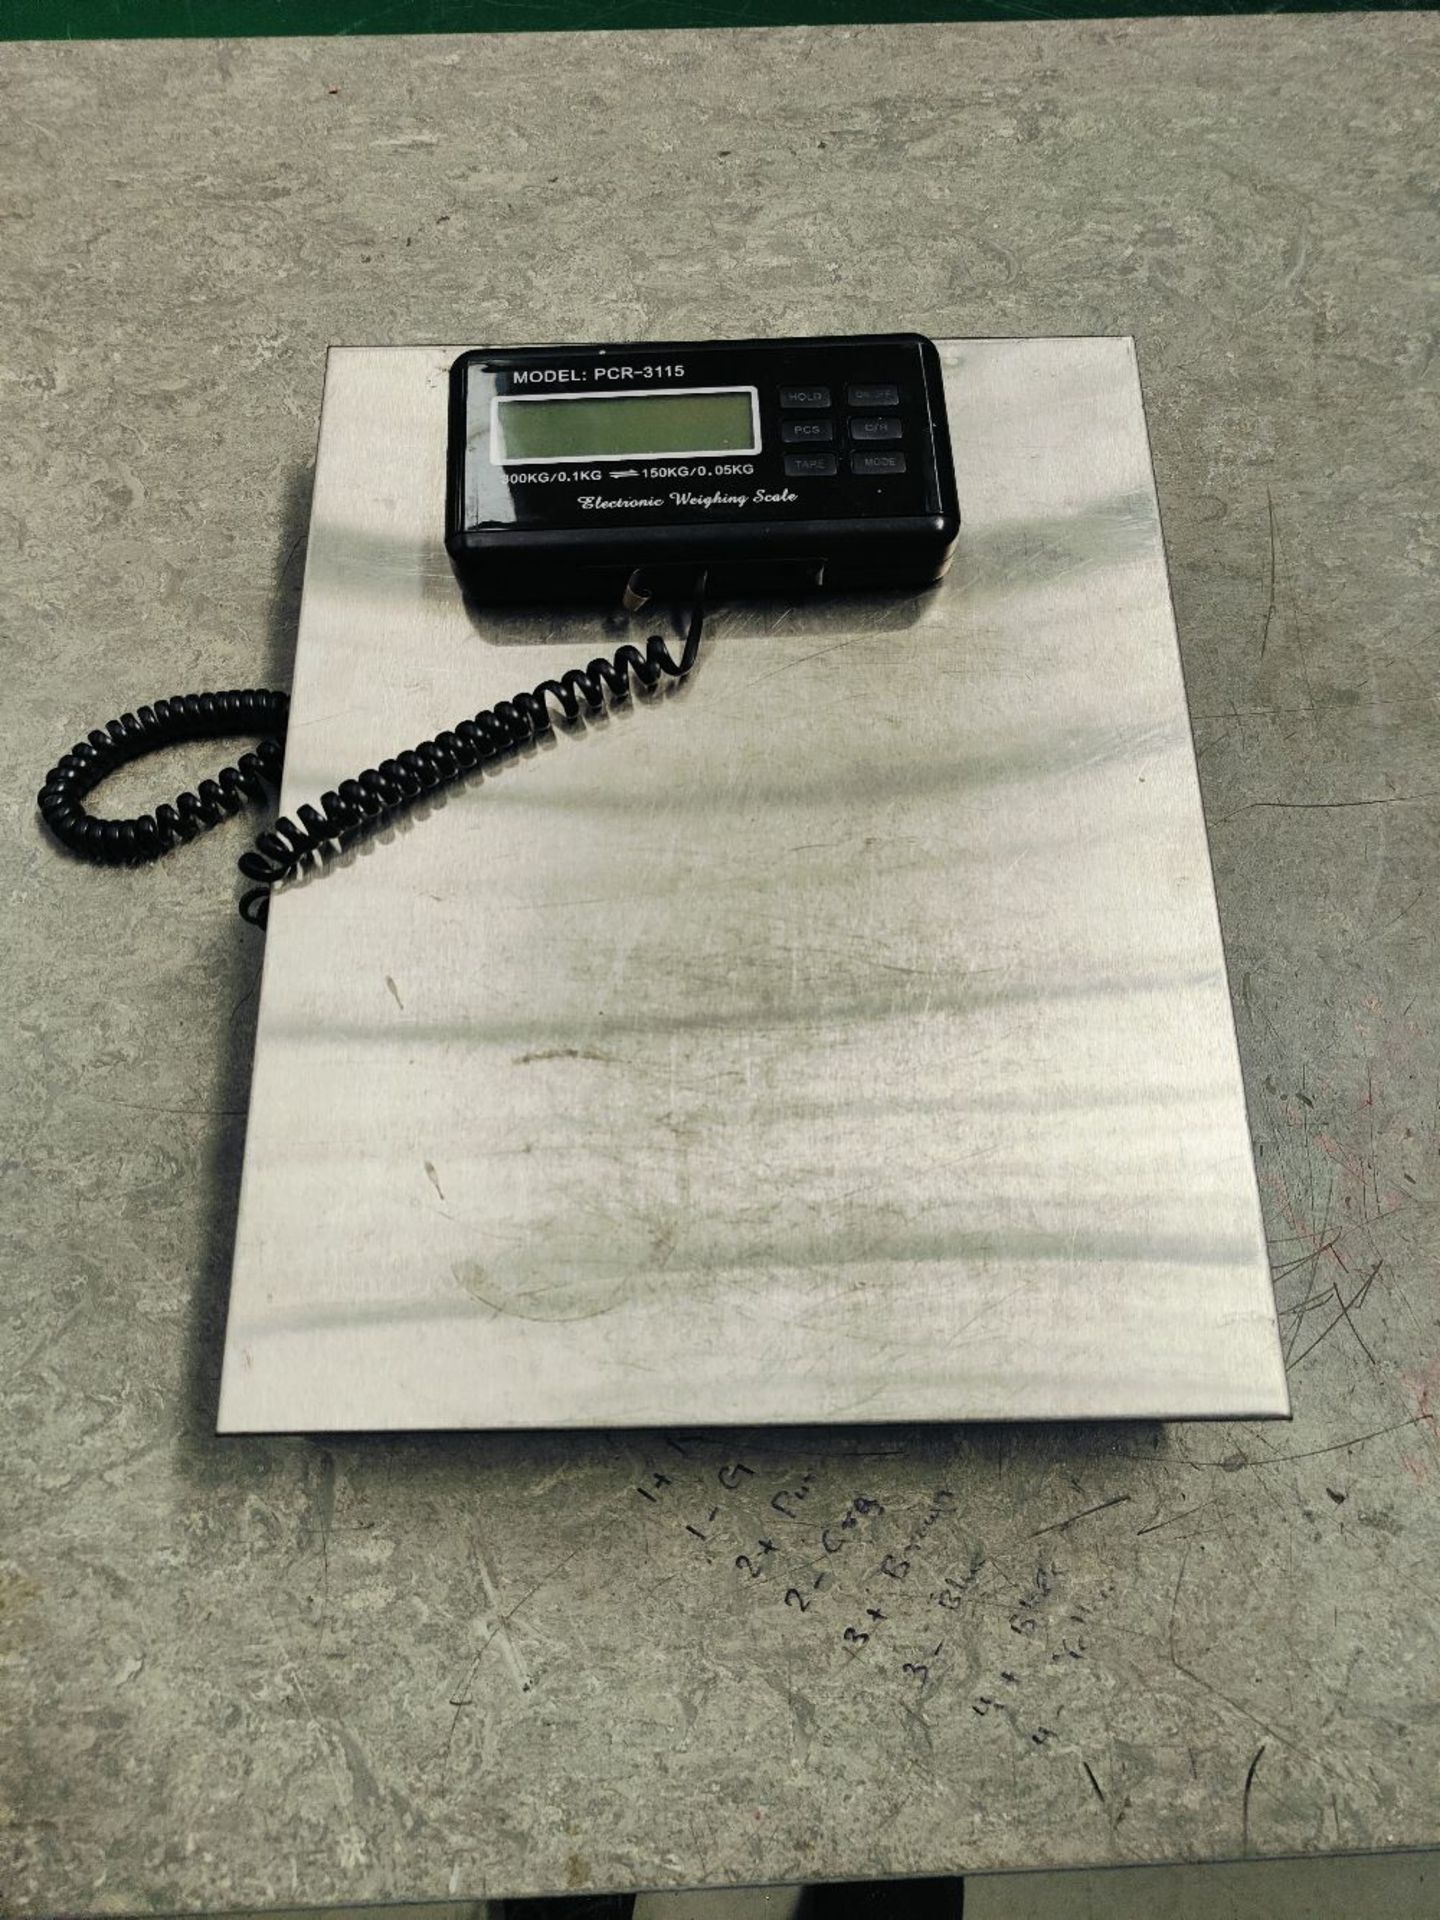 Electronic Scales and (2) Plastic Film Sealers - Image 2 of 4